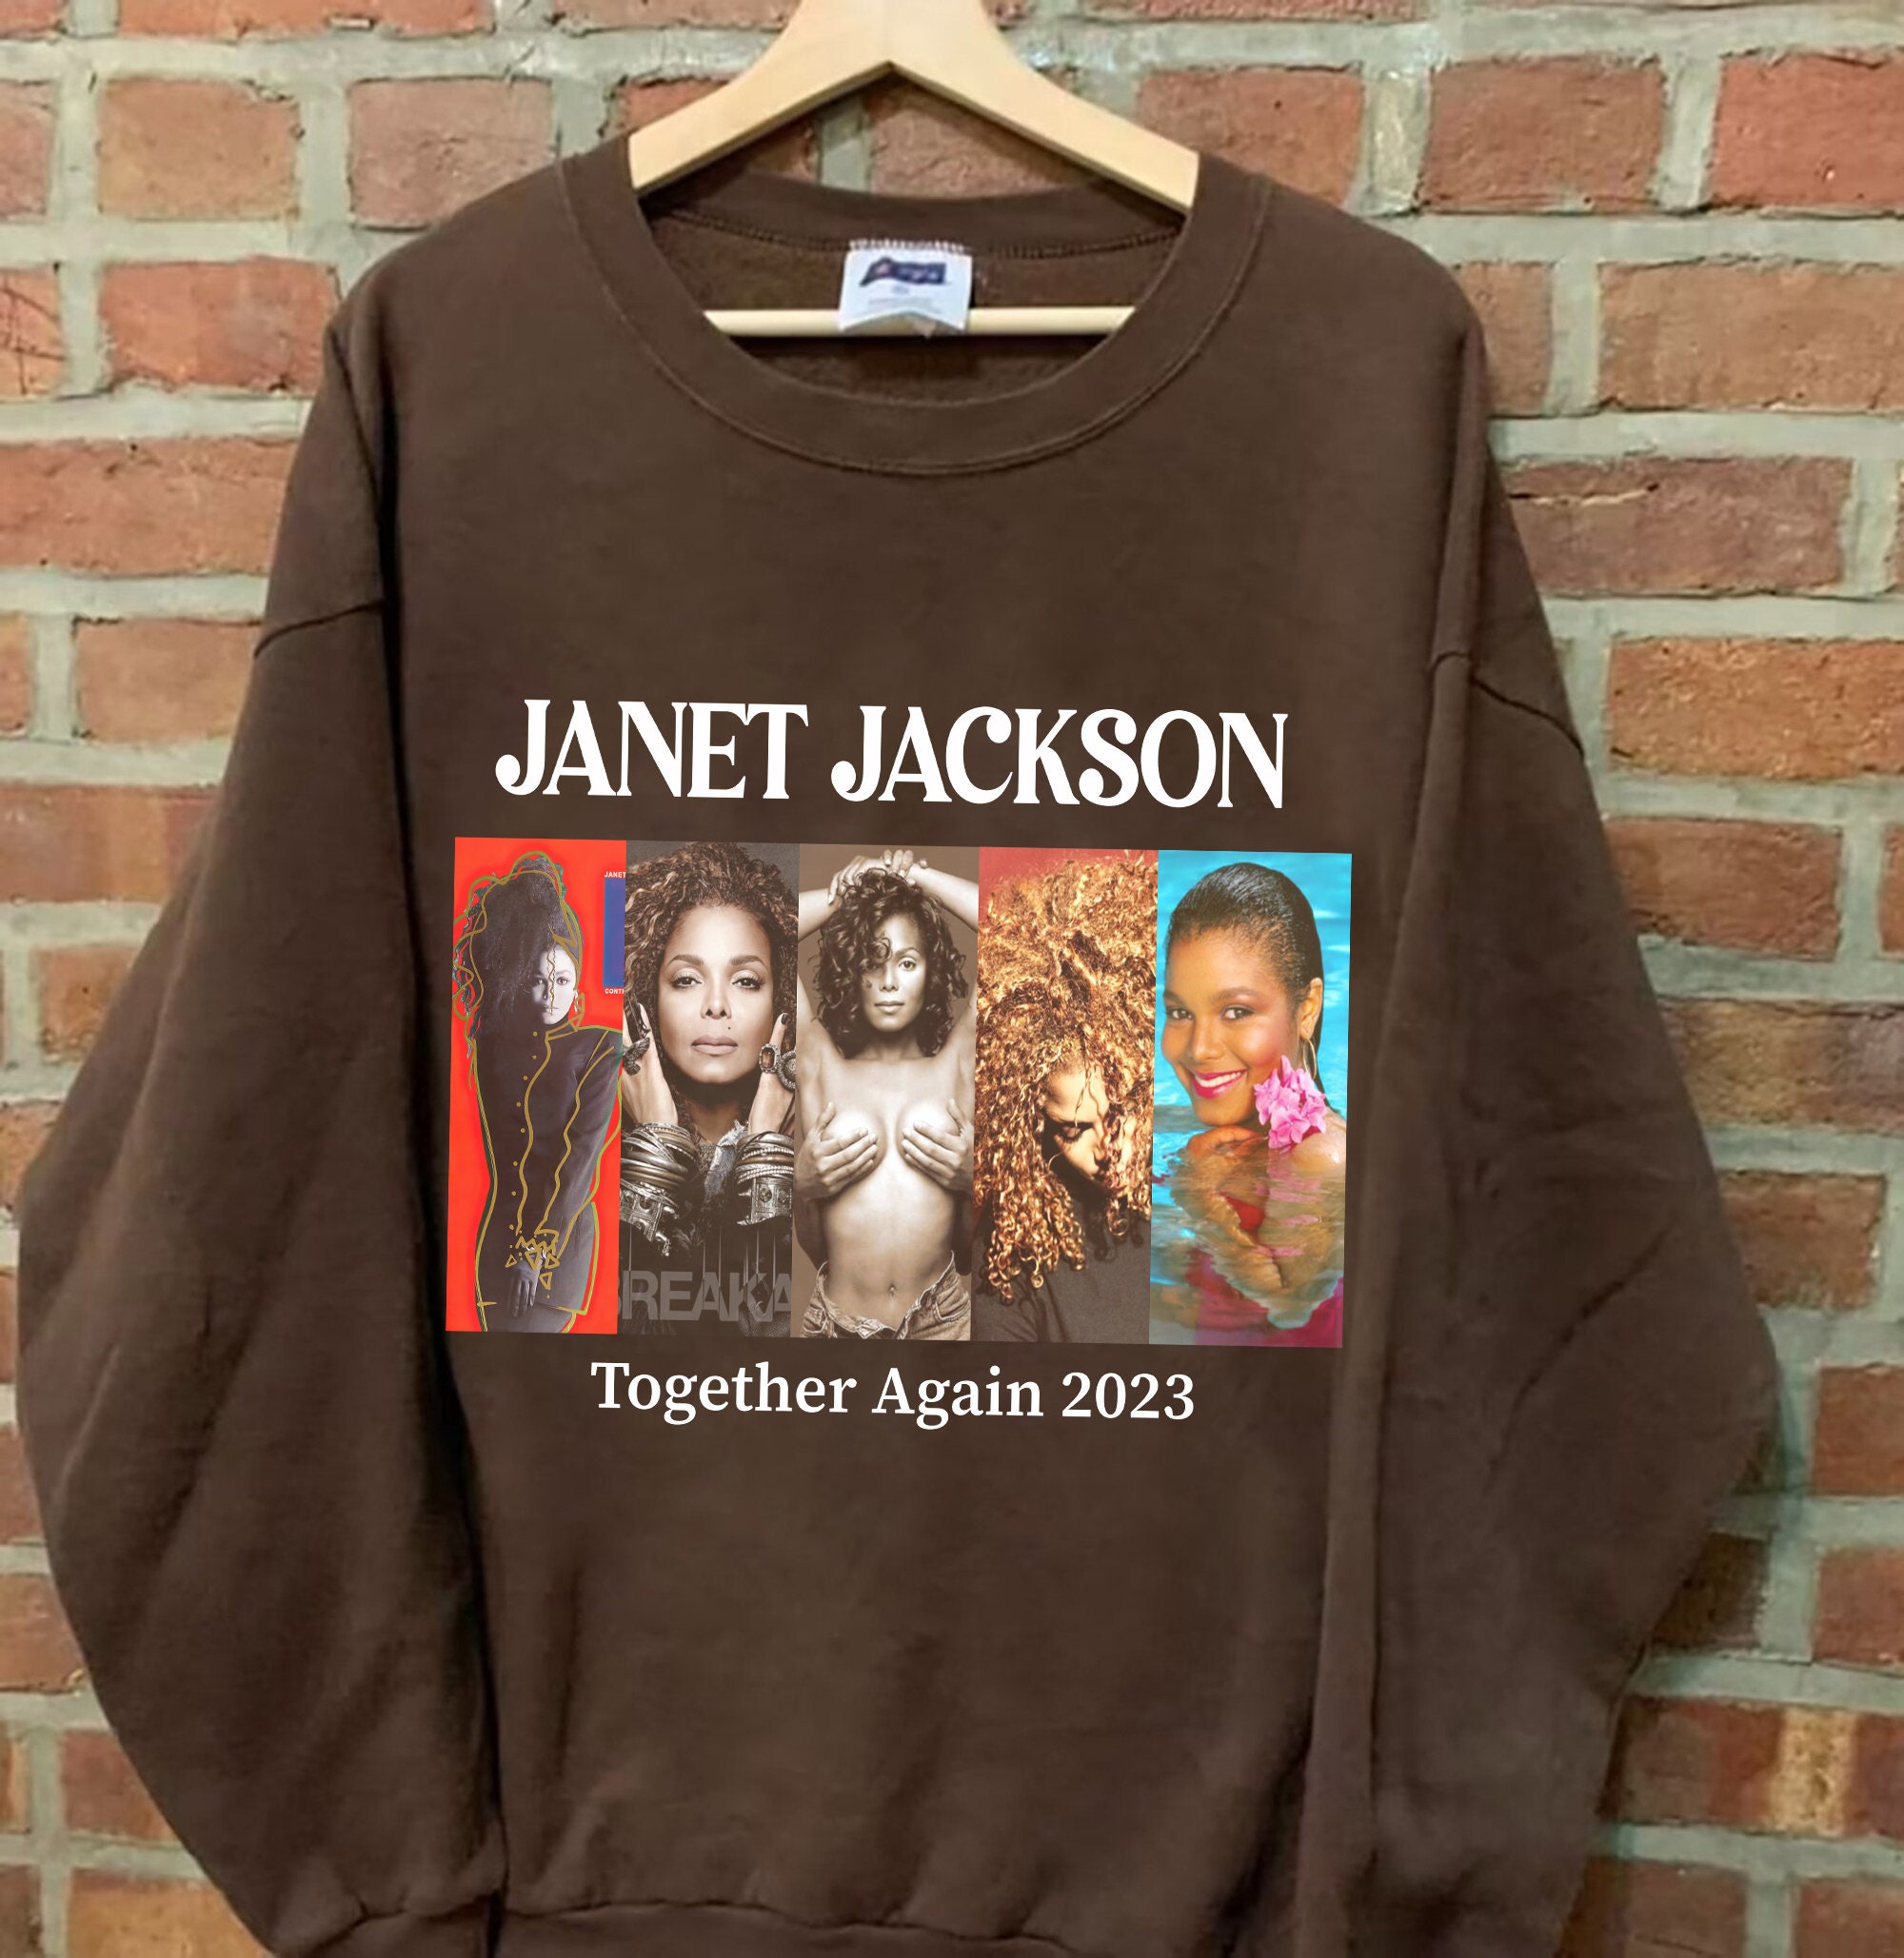 Discover Camiseta Janet Jackson Together Again Tour 2023 The Queen Of Pop para Hombre Mujer